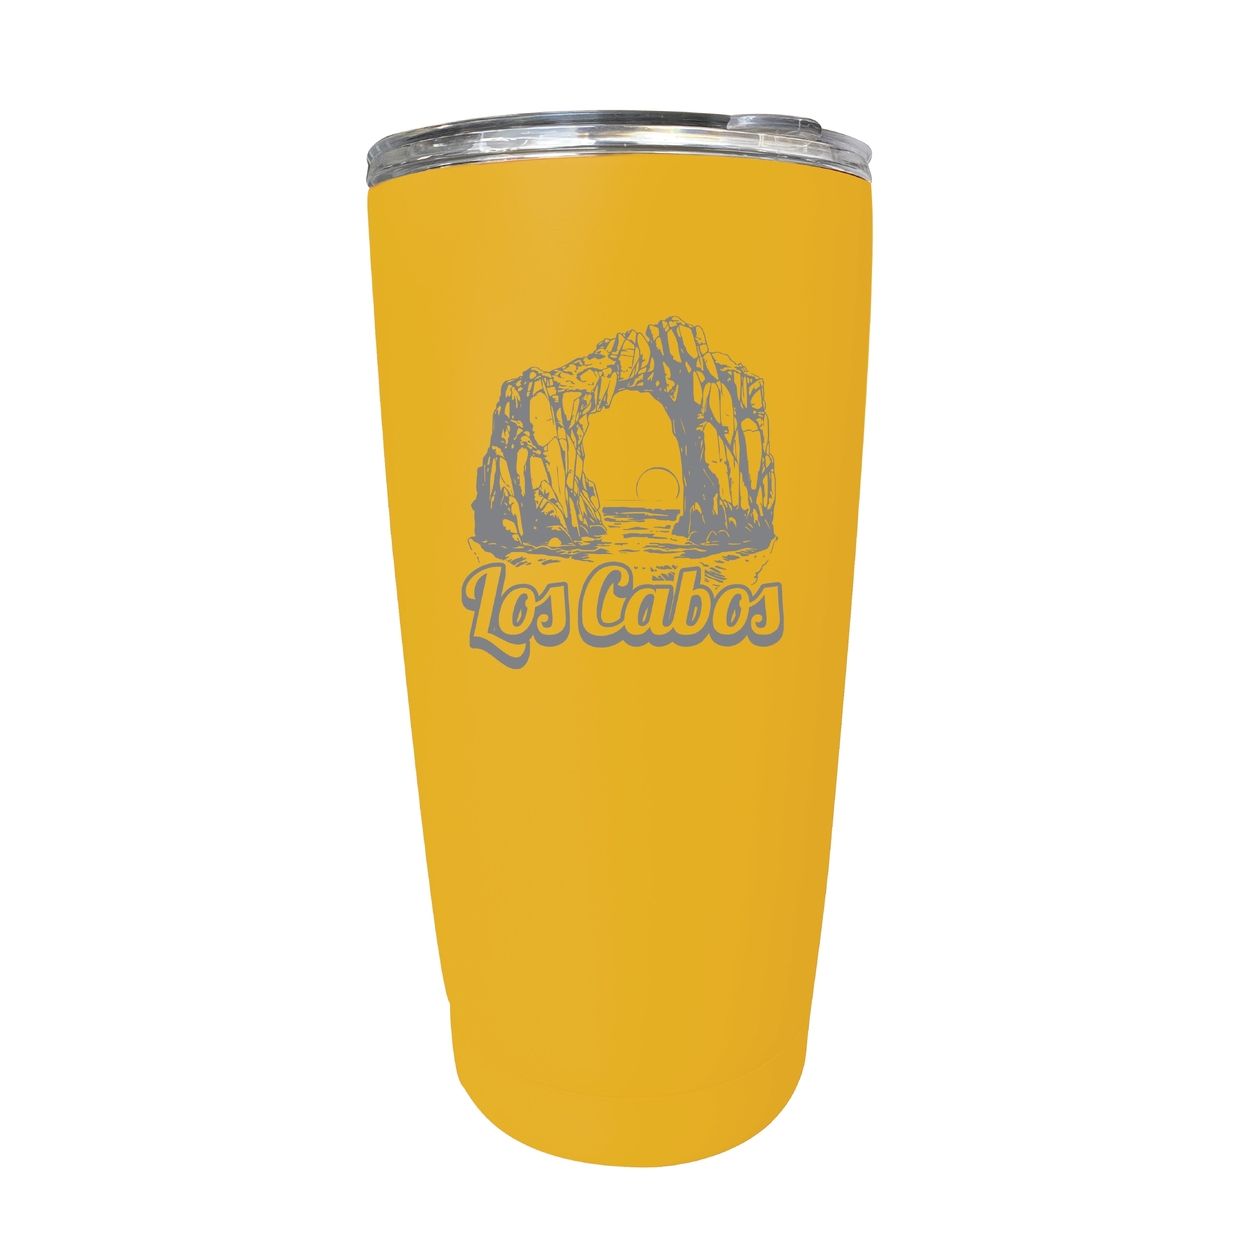 Los Cabos Mexico Souvenir 16 Oz Engraved Stainless Steel Insulated Tumbler - Yellow,,Single Unit